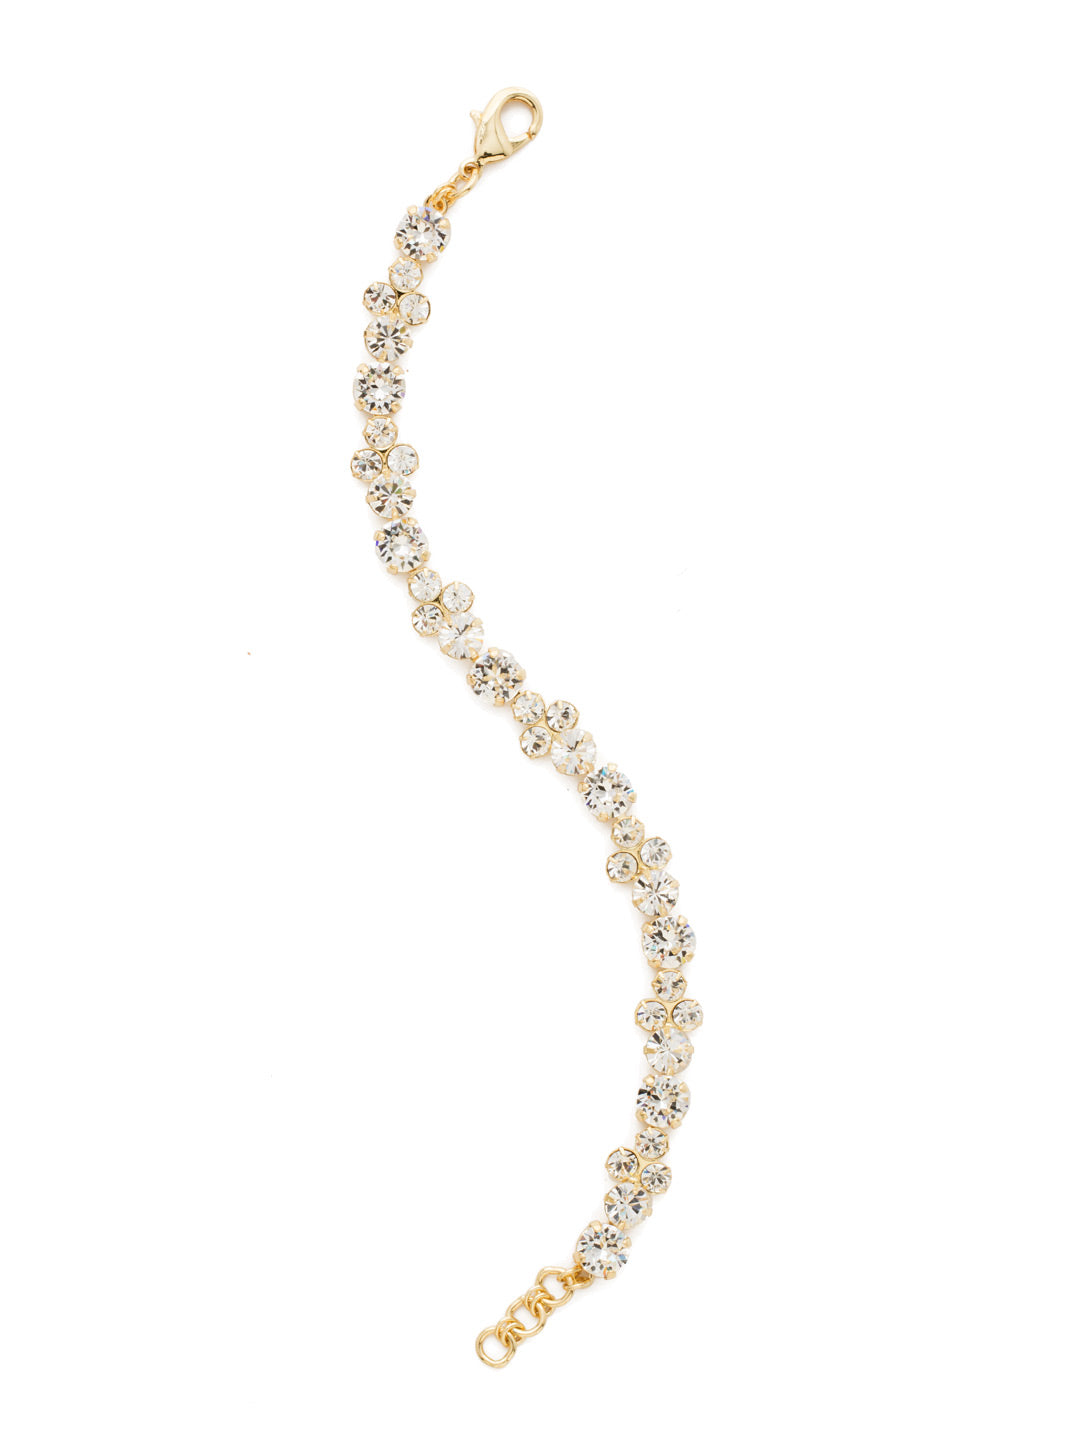 Wisteria Tennis Bracelet - BDQ36BGCRY - <p>Round and round we go with a linear pattern of circular crystals. From Sorrelli's Crystal collection in our Bright Gold-tone finish.</p>